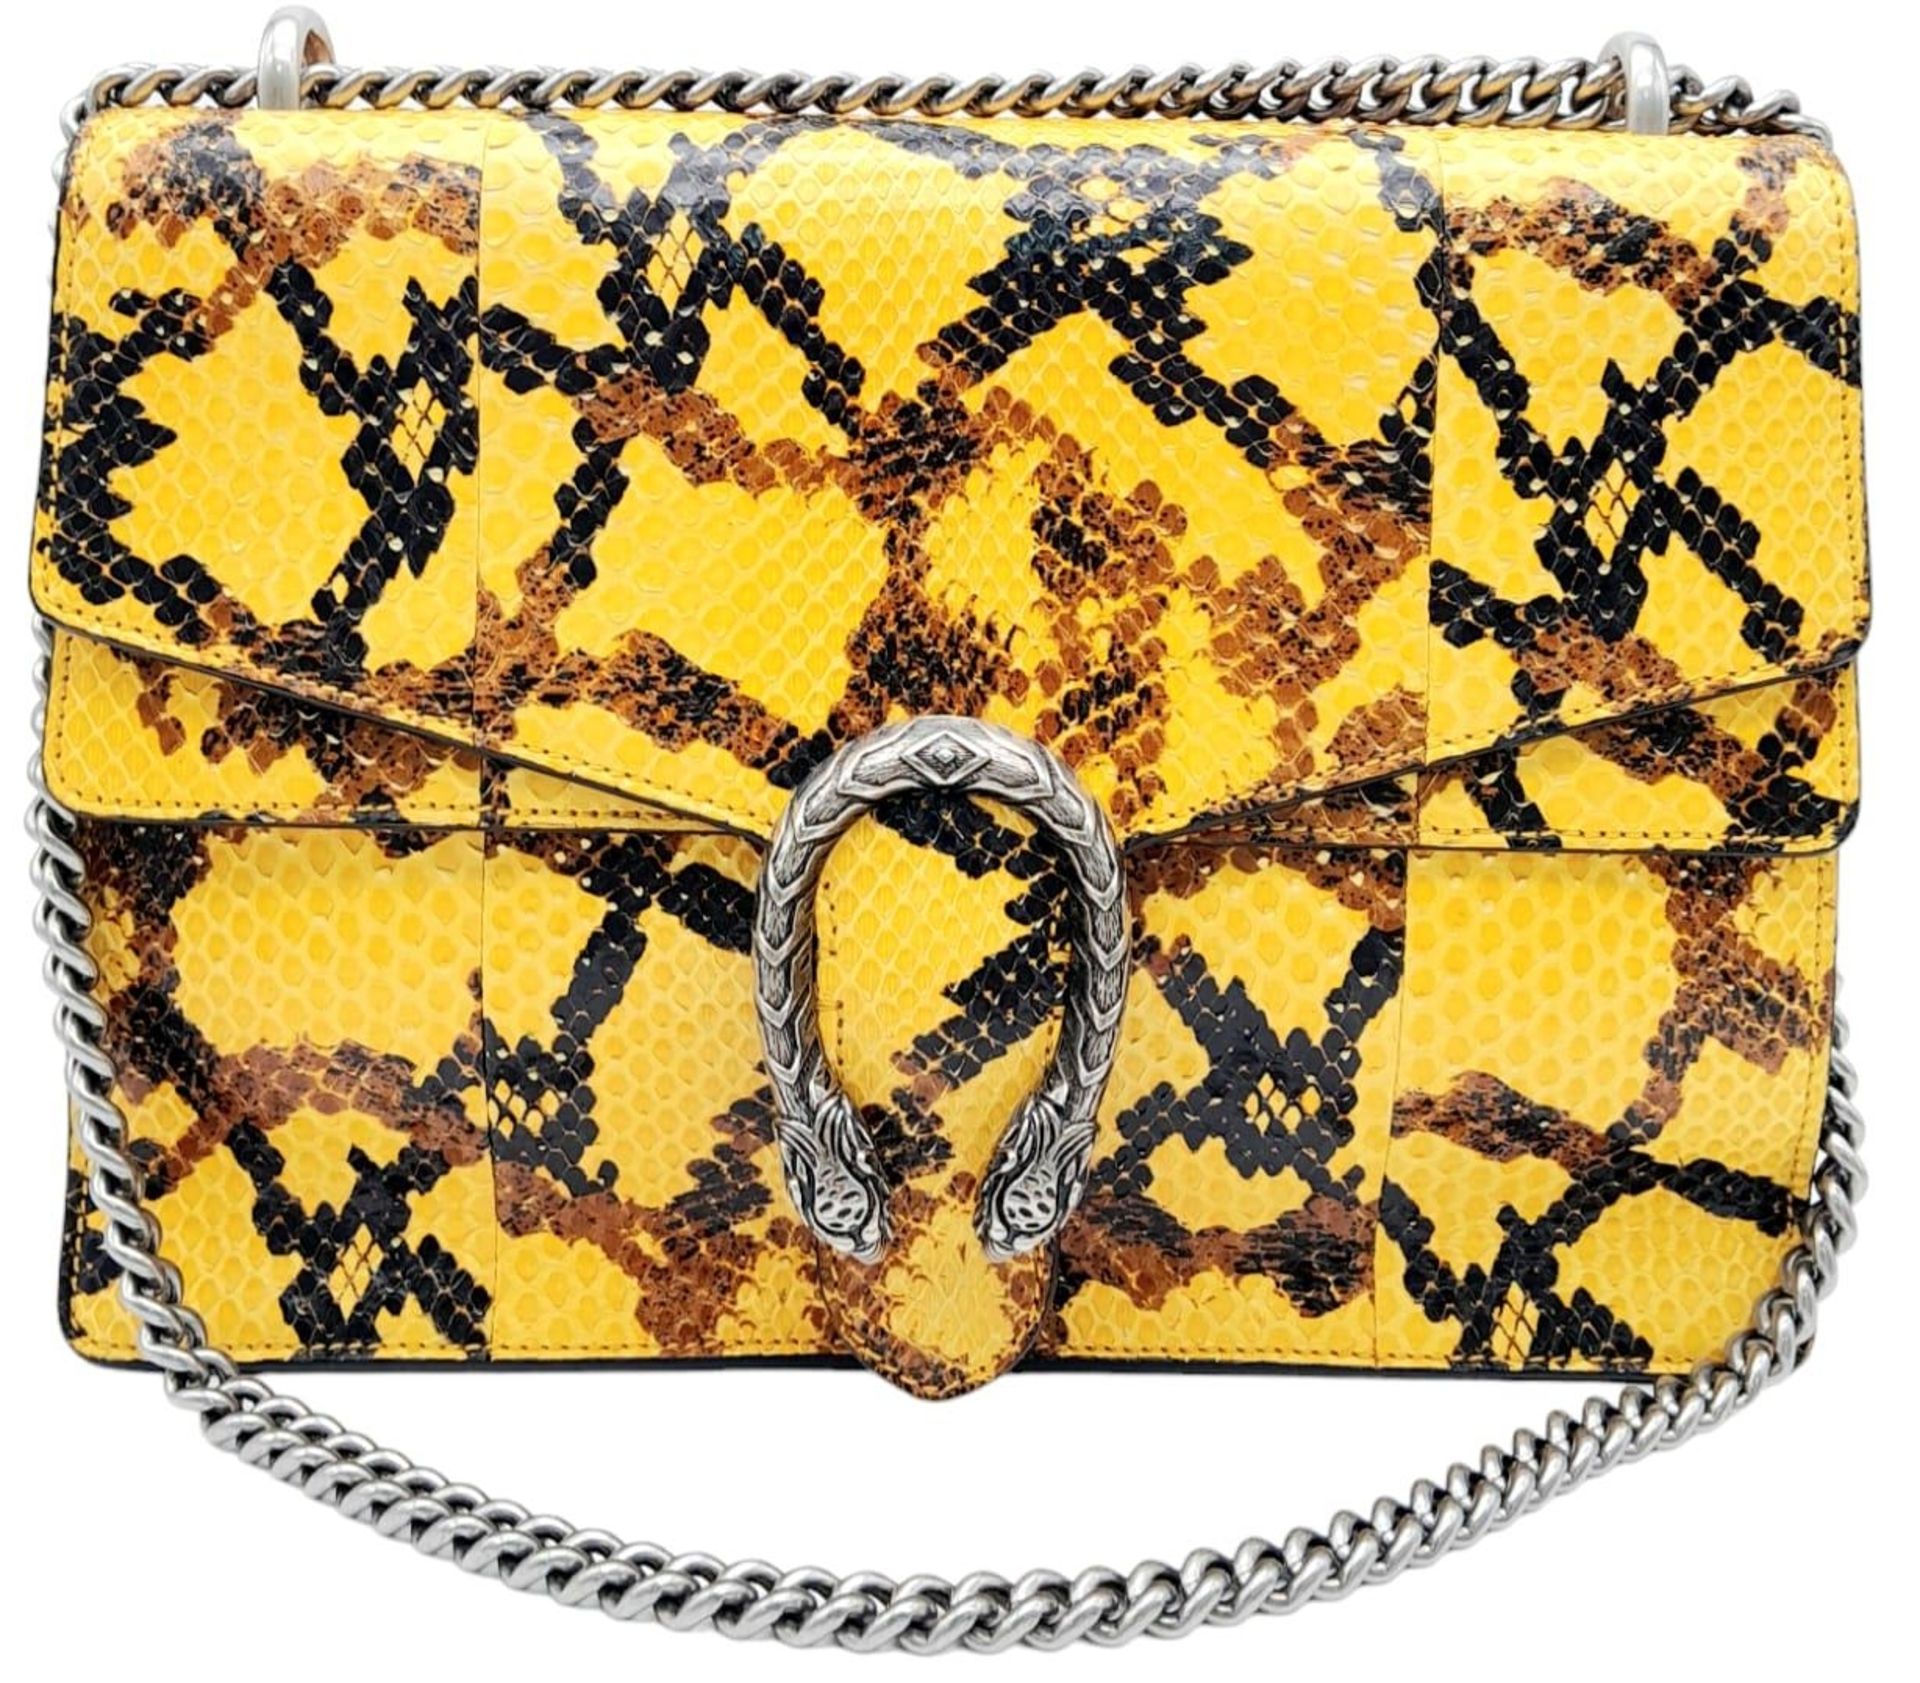 A Gucci Dionysus Python Pochette. With Silver Metal Hardware and Convertible Silver Metal Chain